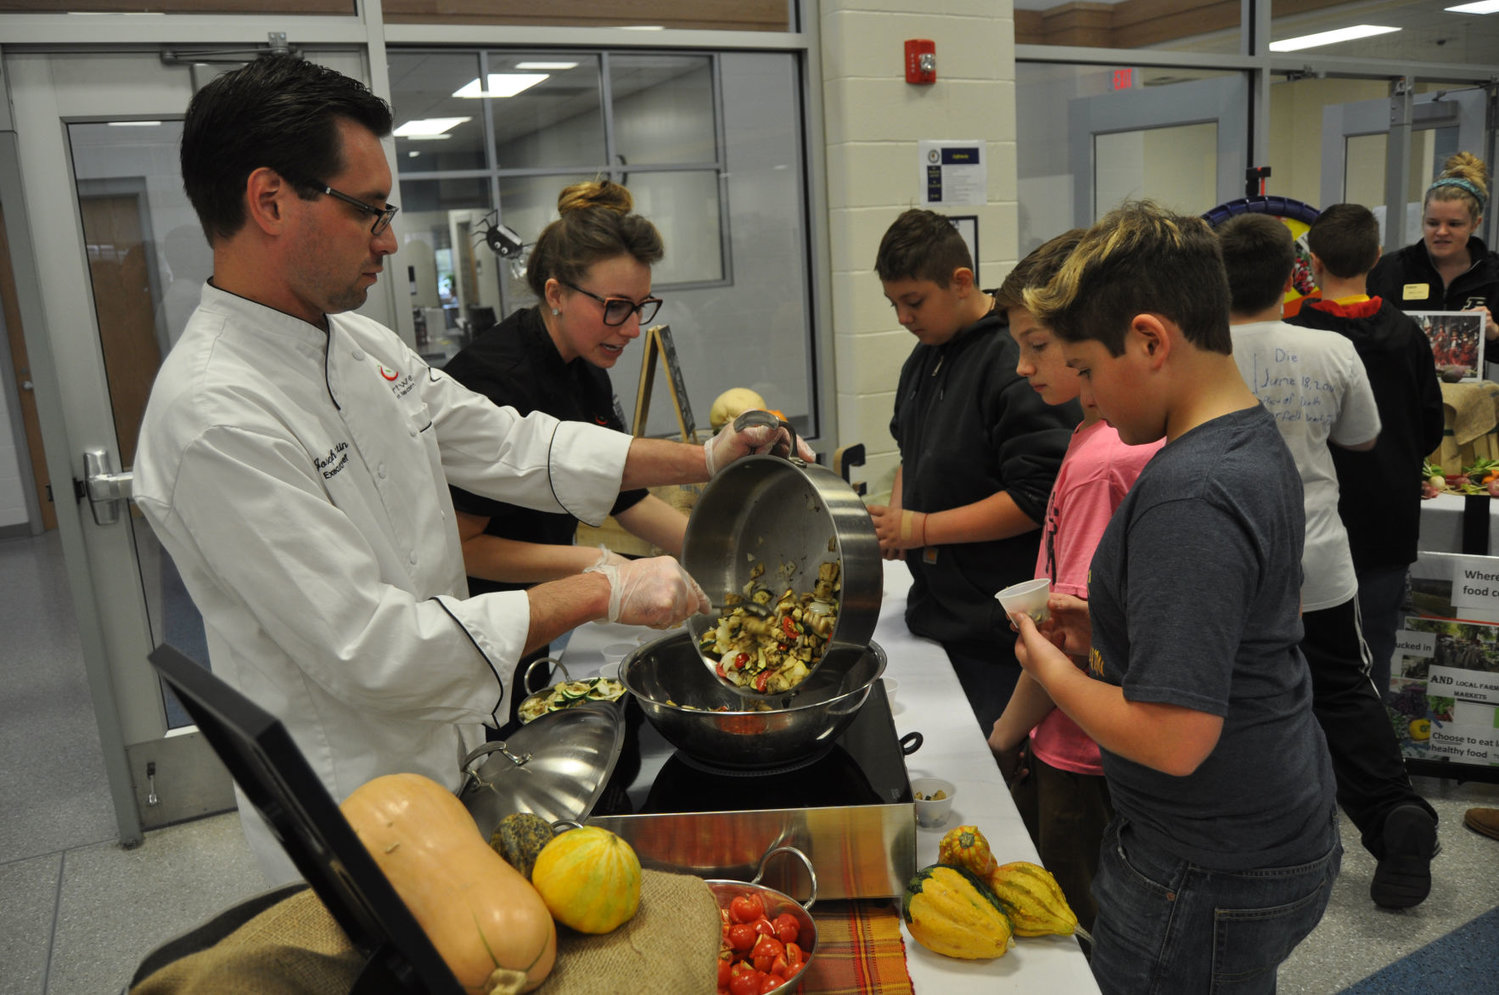 Chartwells chef Joseph Peretin scoops Ratatouille out of a pan as resident dietician Tarrah McCreary speaks to students Friday during the Farm to School event at Crawfordsville Middle School.